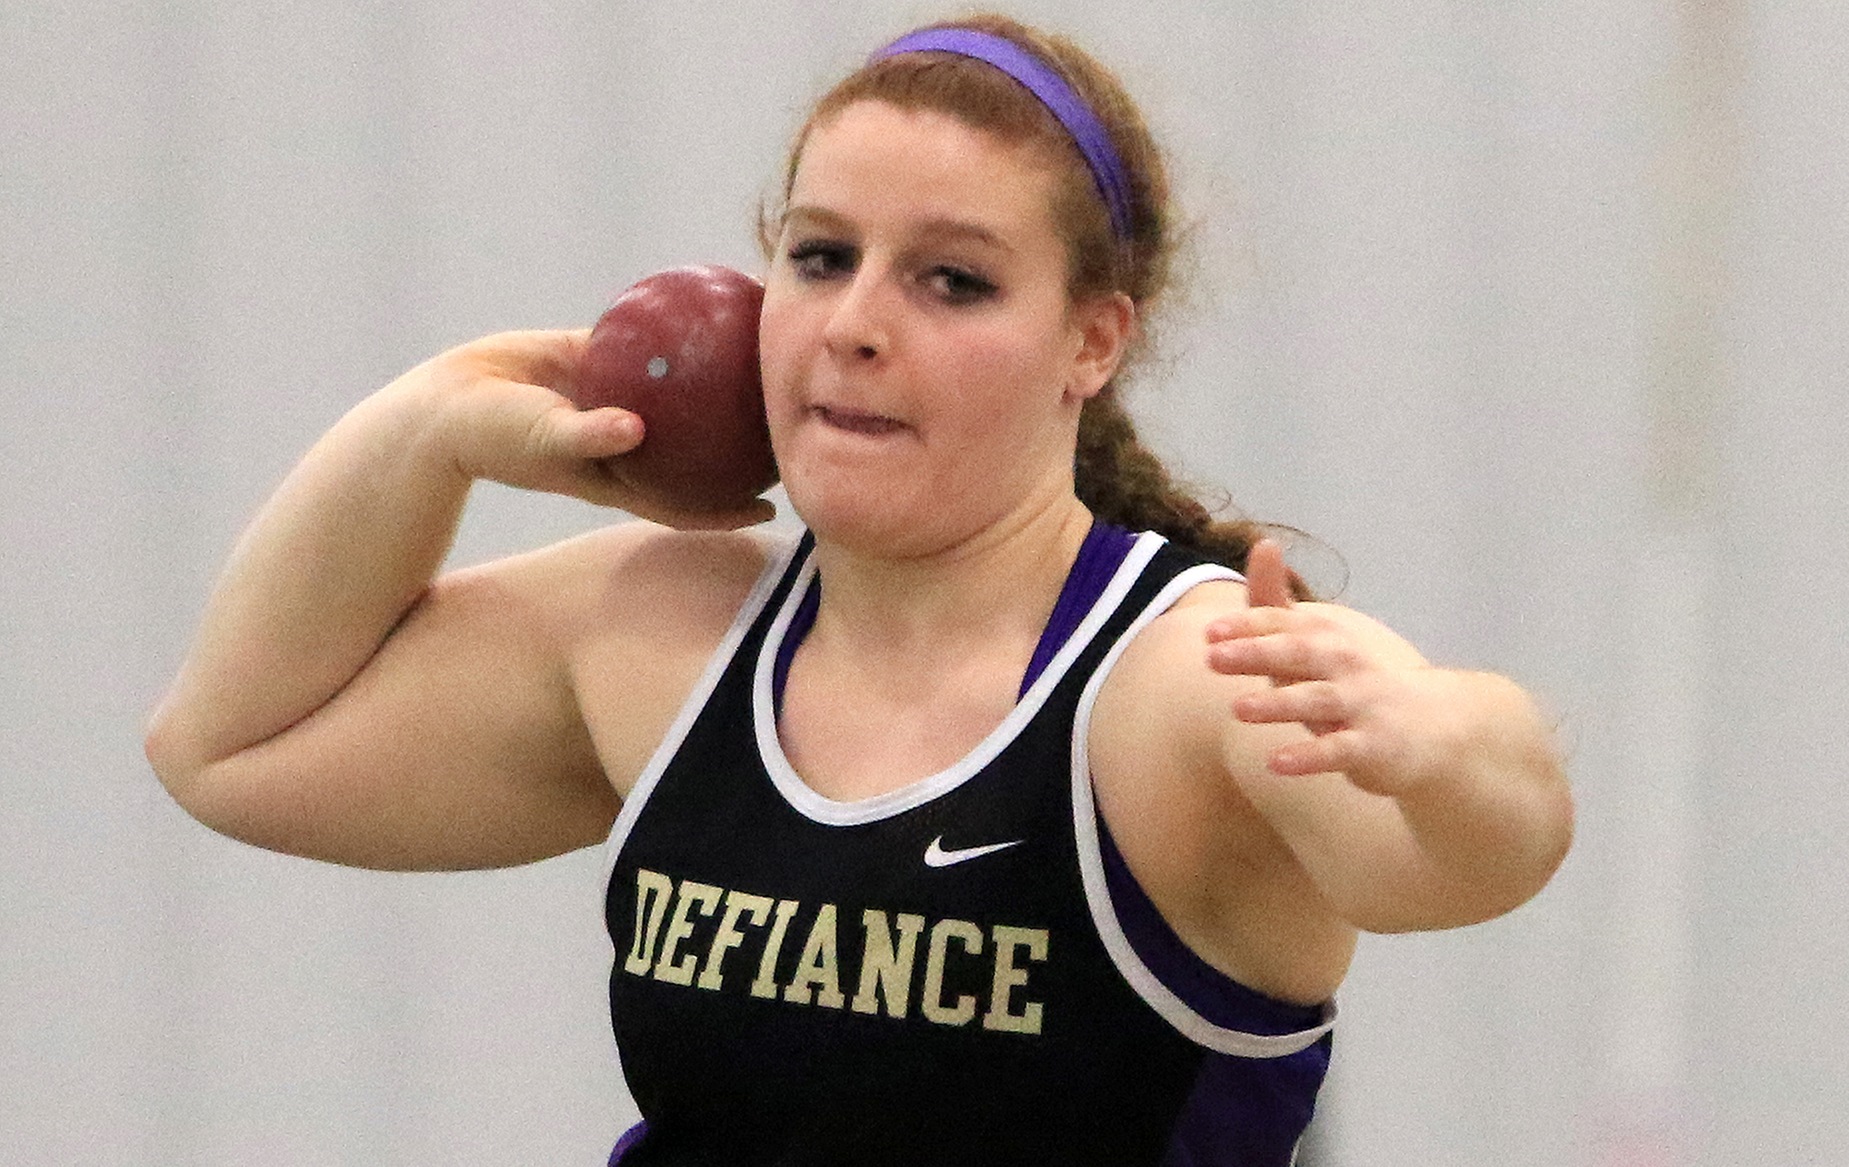 Waidelich Wins Discus at Hanover Invite